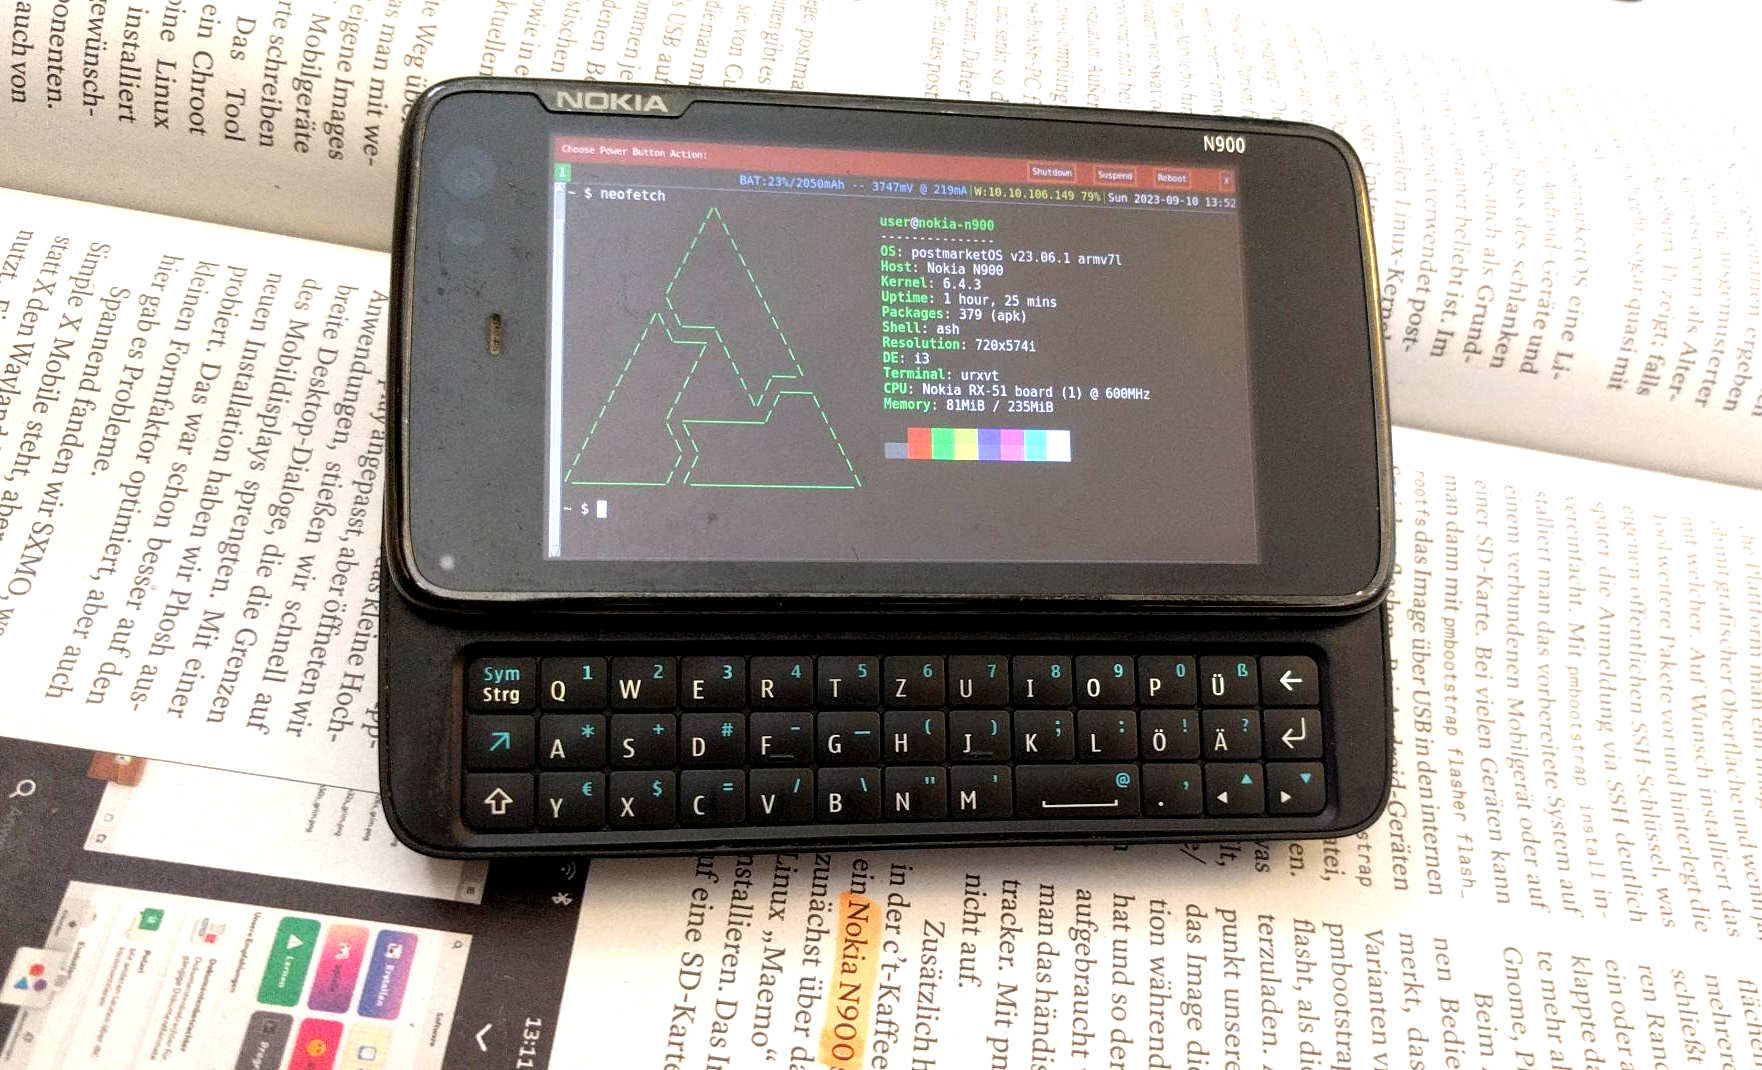 Nokia N900 with v23.06 SP1 installed, showing a terminal with neofetch, on top of the latest c't magazine with an article about postmarketOS in which the string "Nokia N900" was highlighted manually with a text marker